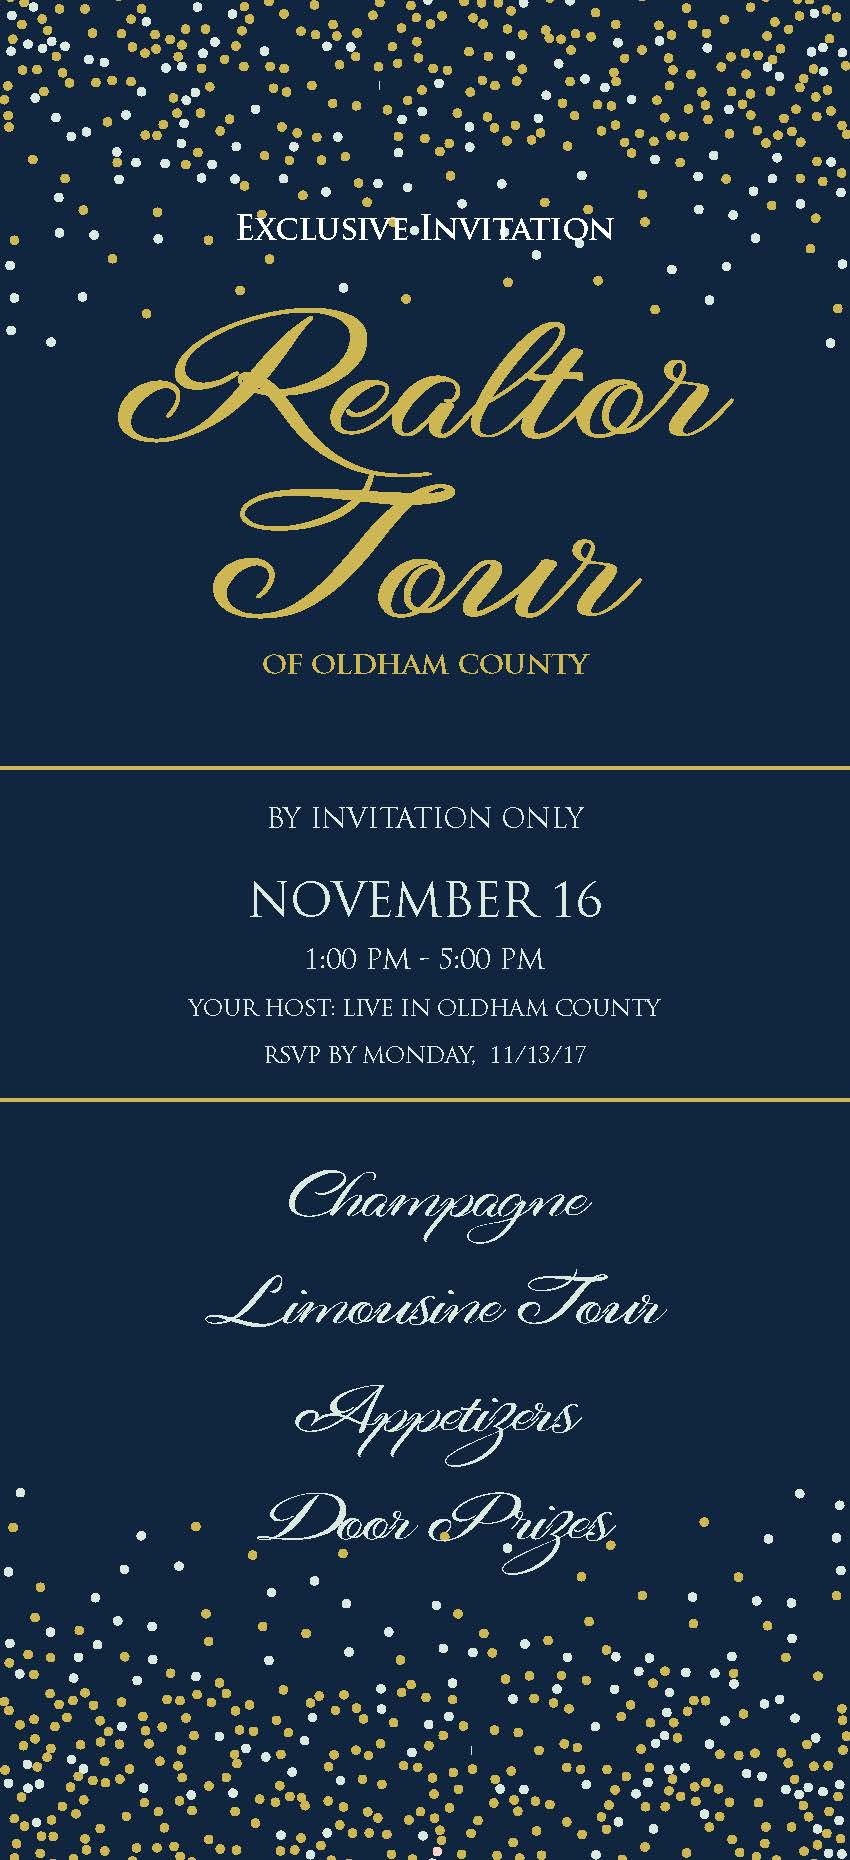 Want to learn more about new construction in Oldham County?  We have booked a limo bus, bought several cases of champagne  and the top developers in Oldham are scheduled to give us exclusive sneak peaks of their new neighborhoods in OC.